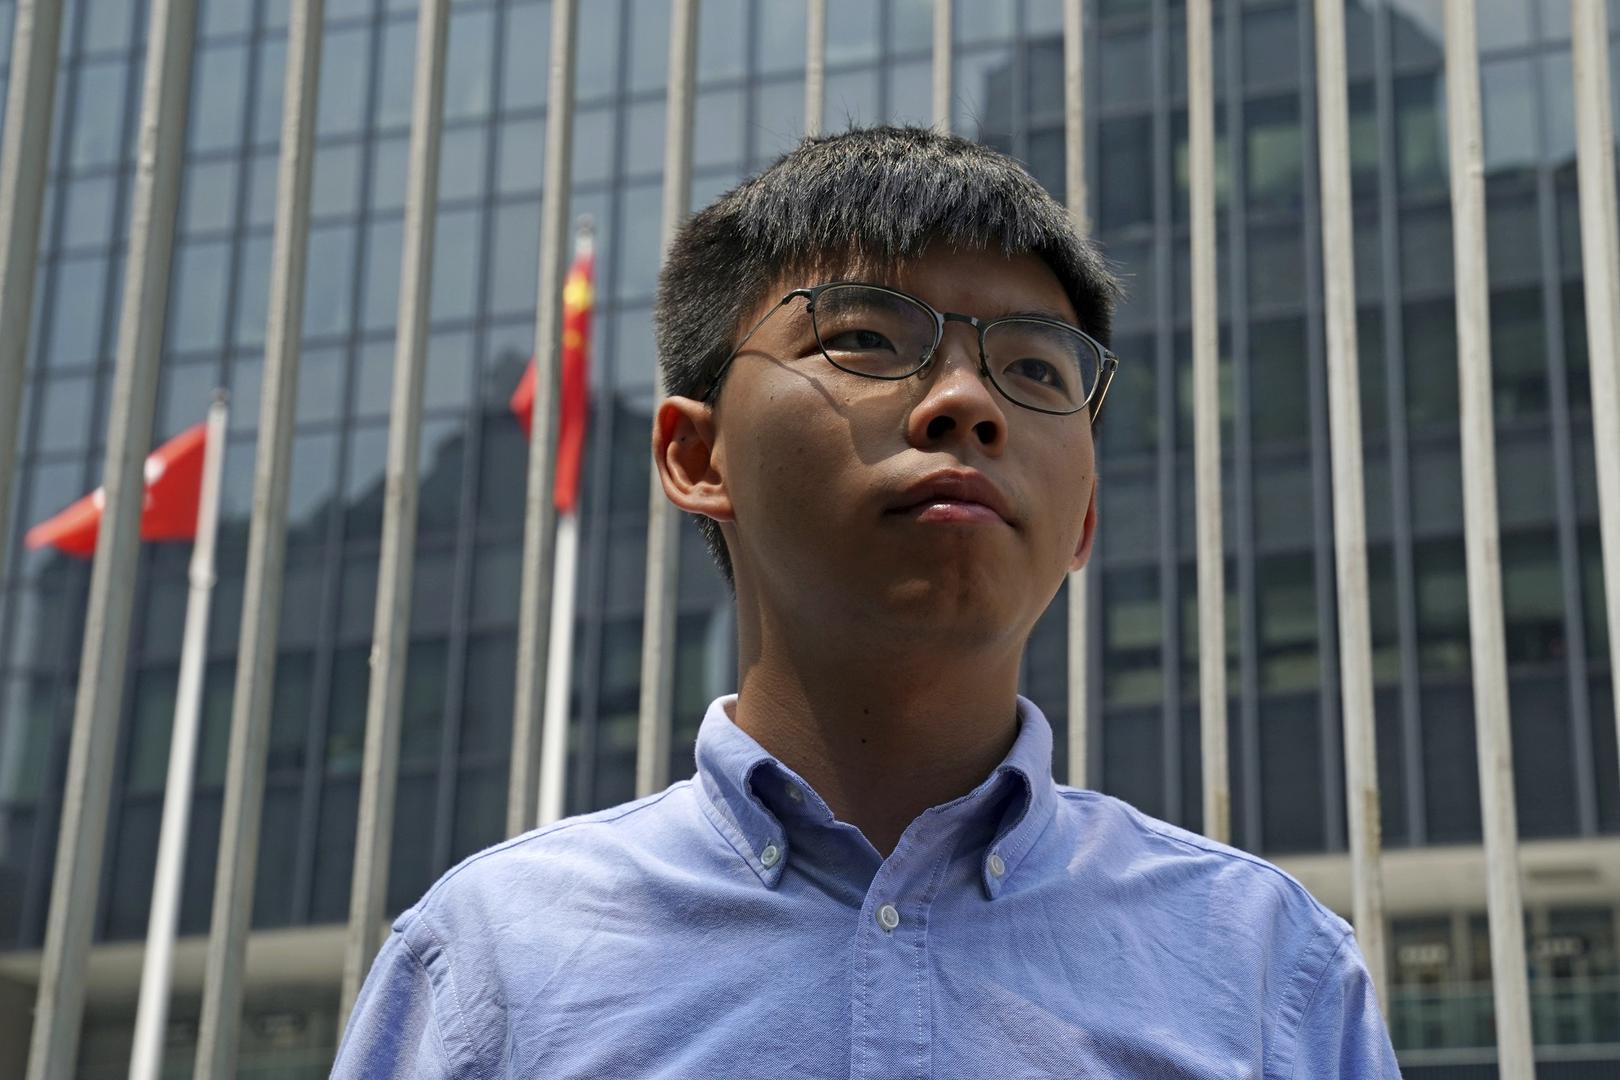 Hong Kong: Prominent Activist Barred from Elections